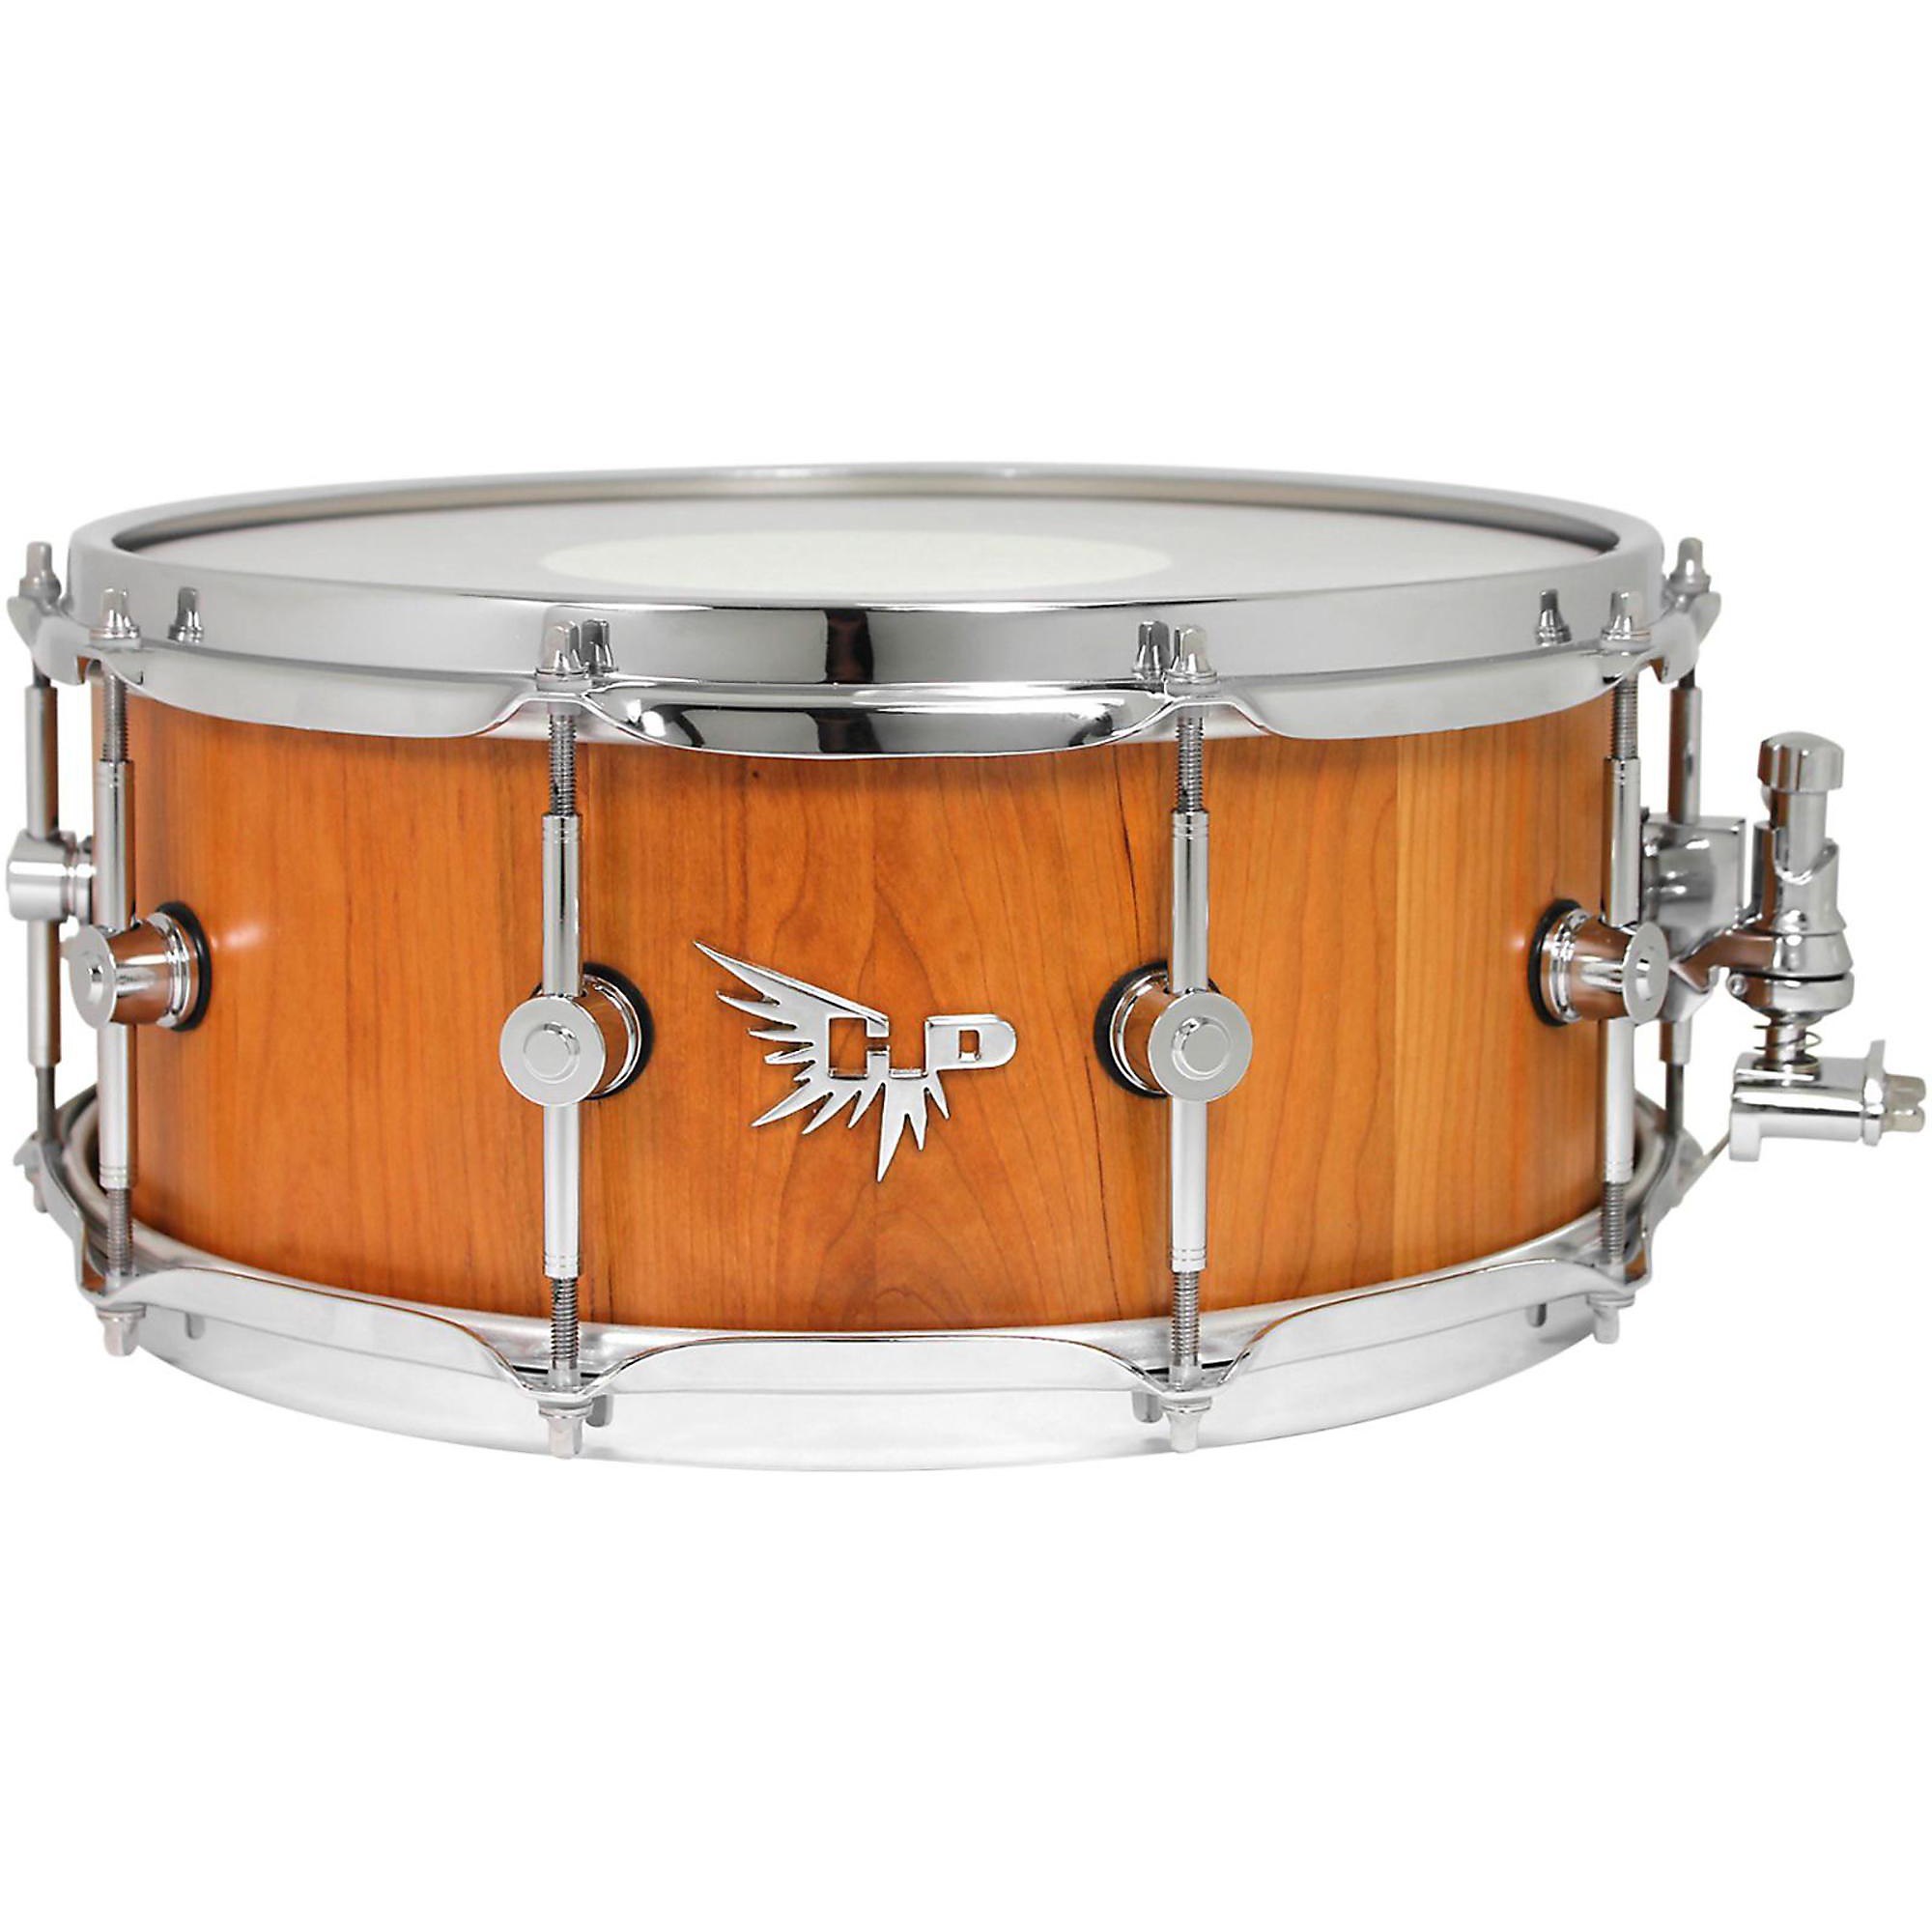 Hendrix Drums Archetype Series American Black Cherry Stave Snare 